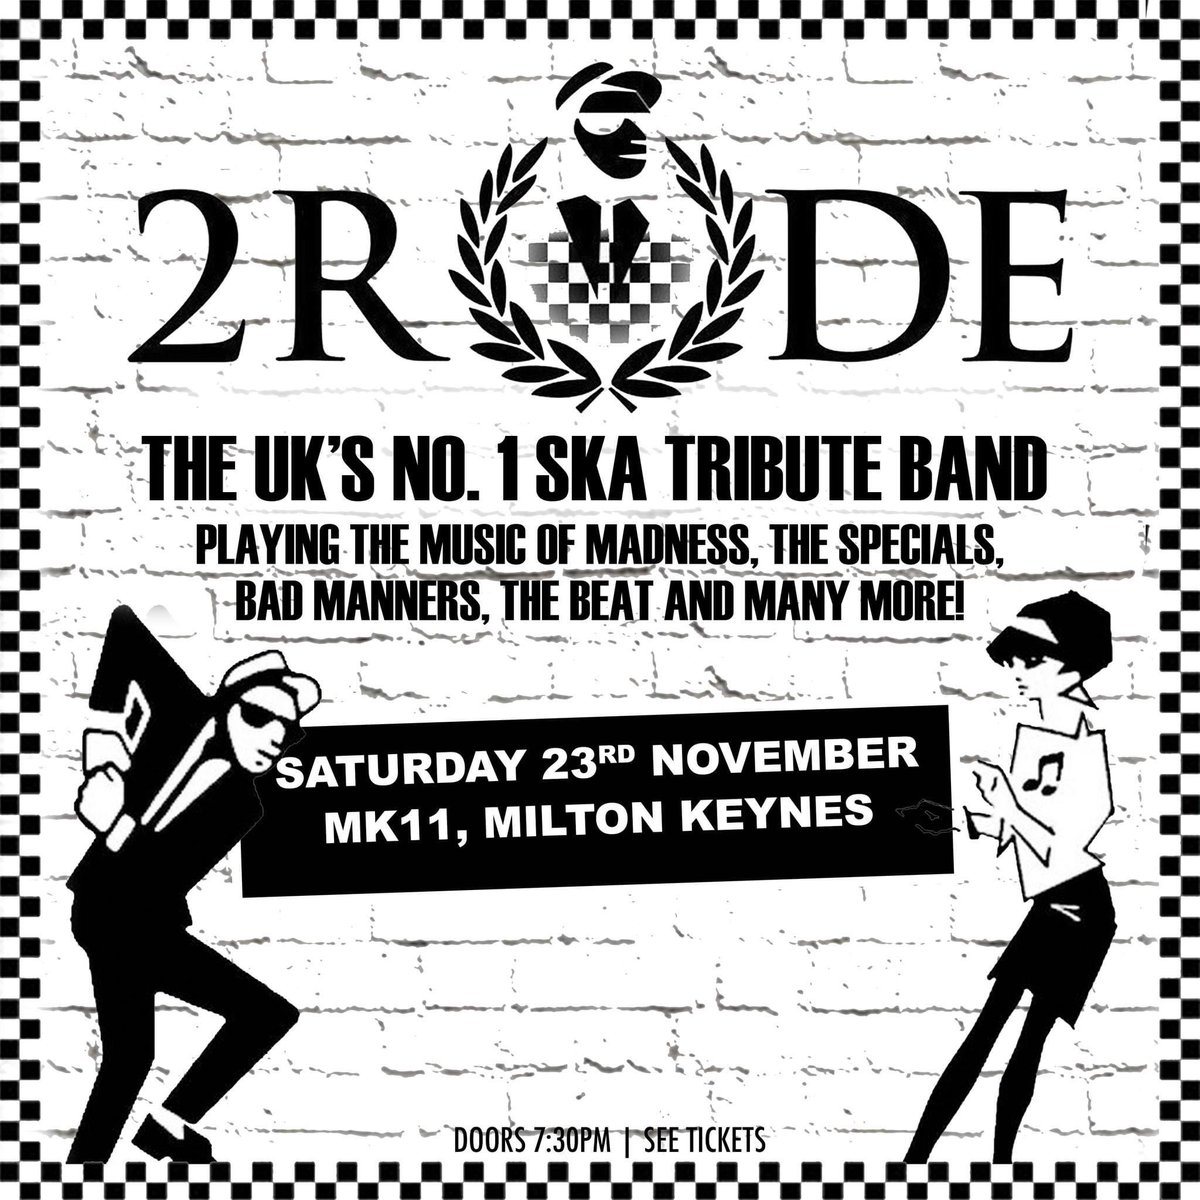 Very excited to announce two new live shows! 😎 Fri Nov 22nd - @the_bookinghall Dover Sat Nov 23rd - @mk11livemusic Milton Keynes Tickets are available here ➡️ good-show.co.uk/events?q=2+rude #2Rude #Ska #TributeBand #CoverBand #2Tone #LiveMusic #Dover #MiltonKeynes